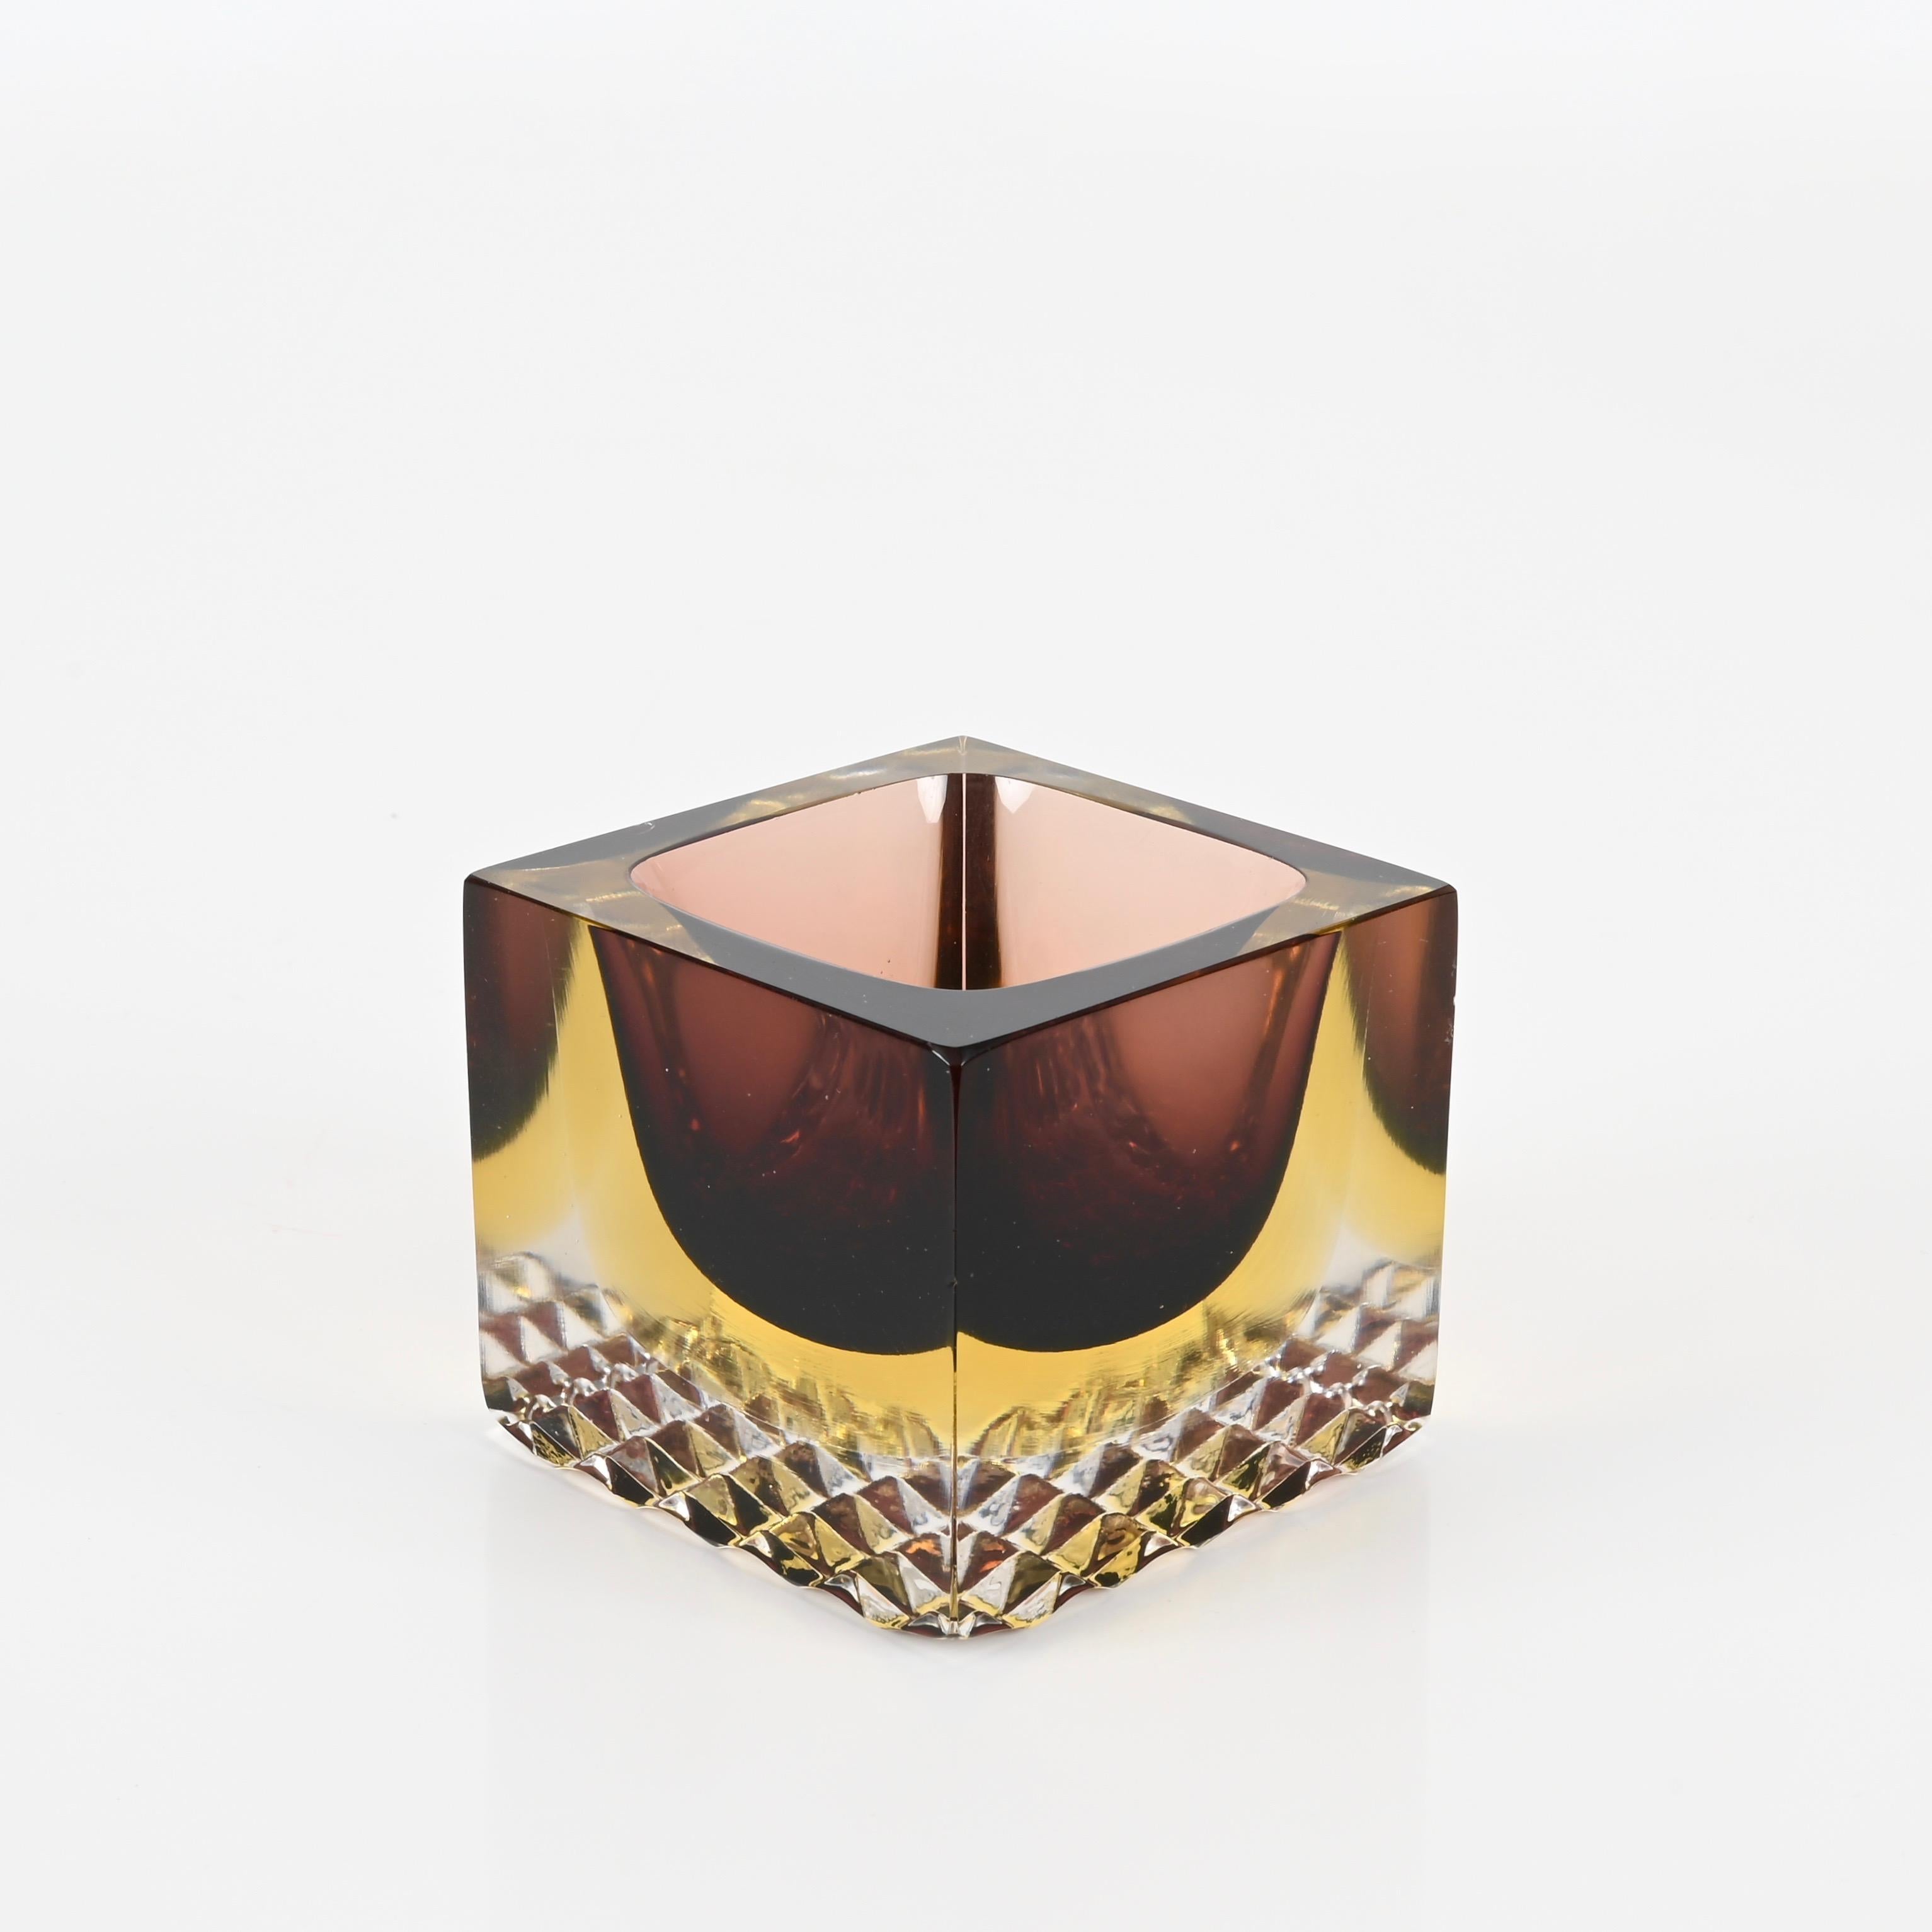 Mid-Century Modern Murano Decorative Glass in Sommerso Merlot and Yellow Glass, F. Poli Italy, 1960 For Sale